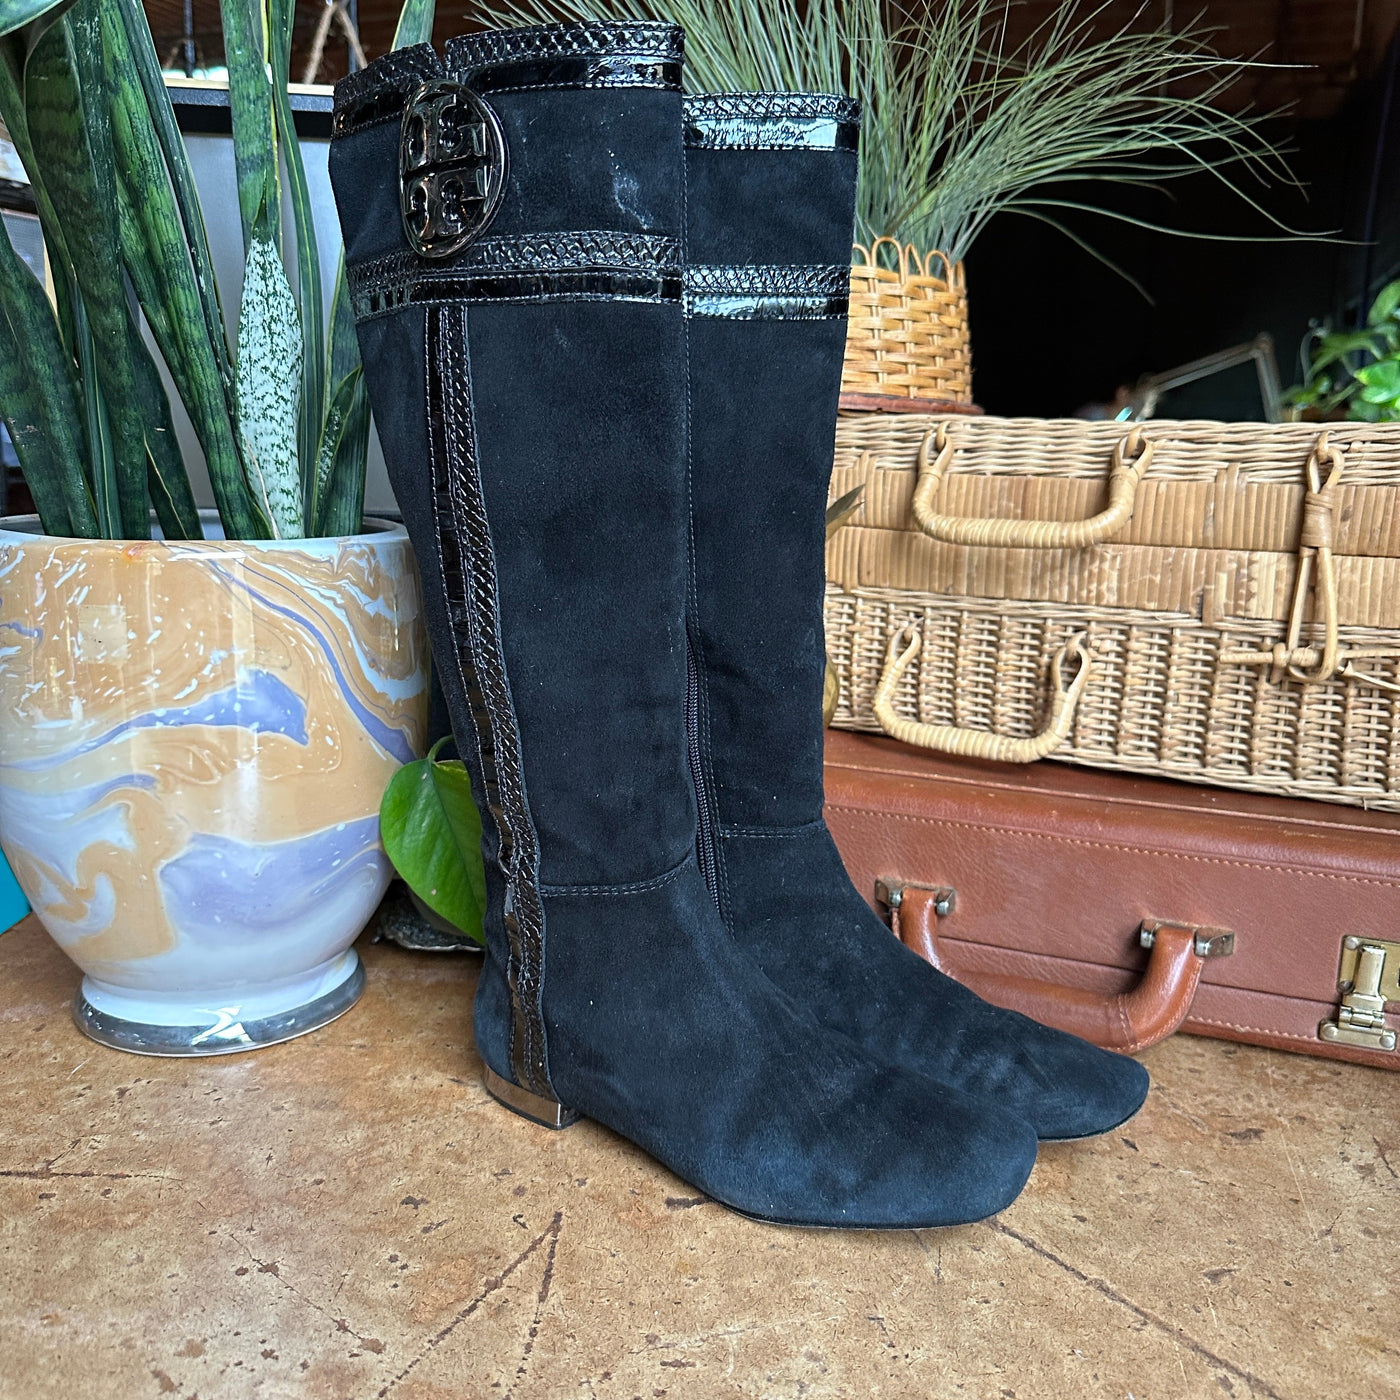 Black Suede Leather “Tory Burch” Boots